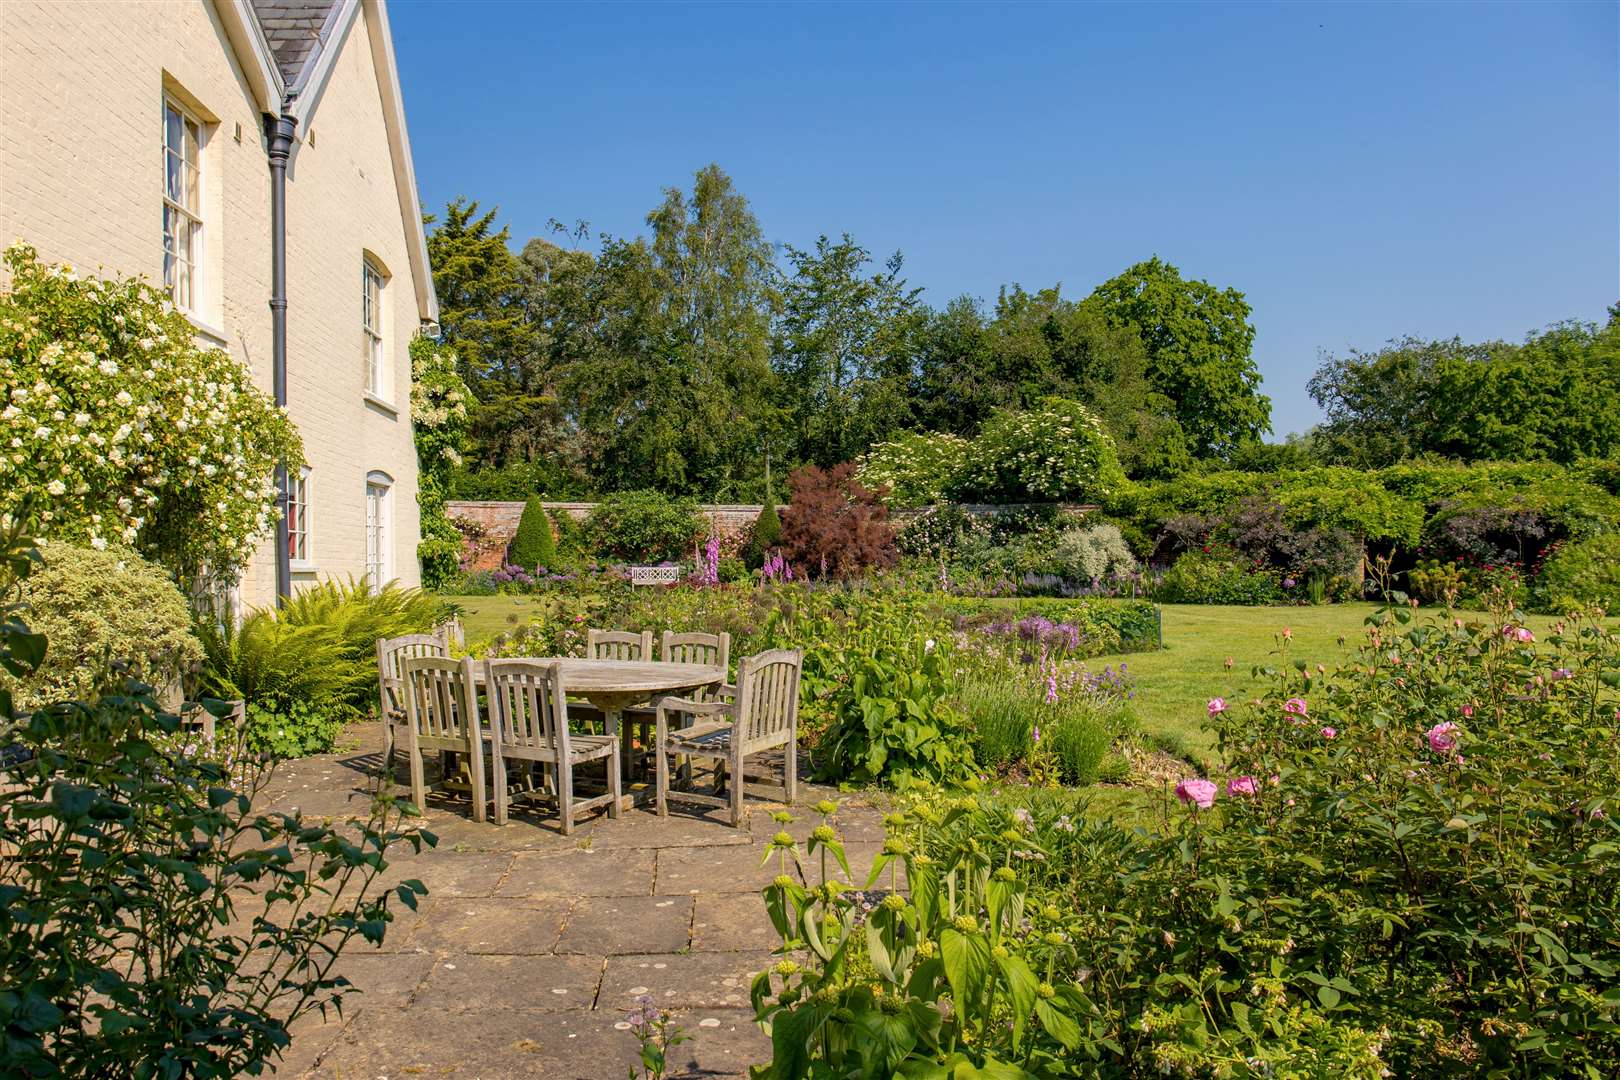 The Grove is a substantial country house situated in a conservation area on the edge of the village of Brinkley